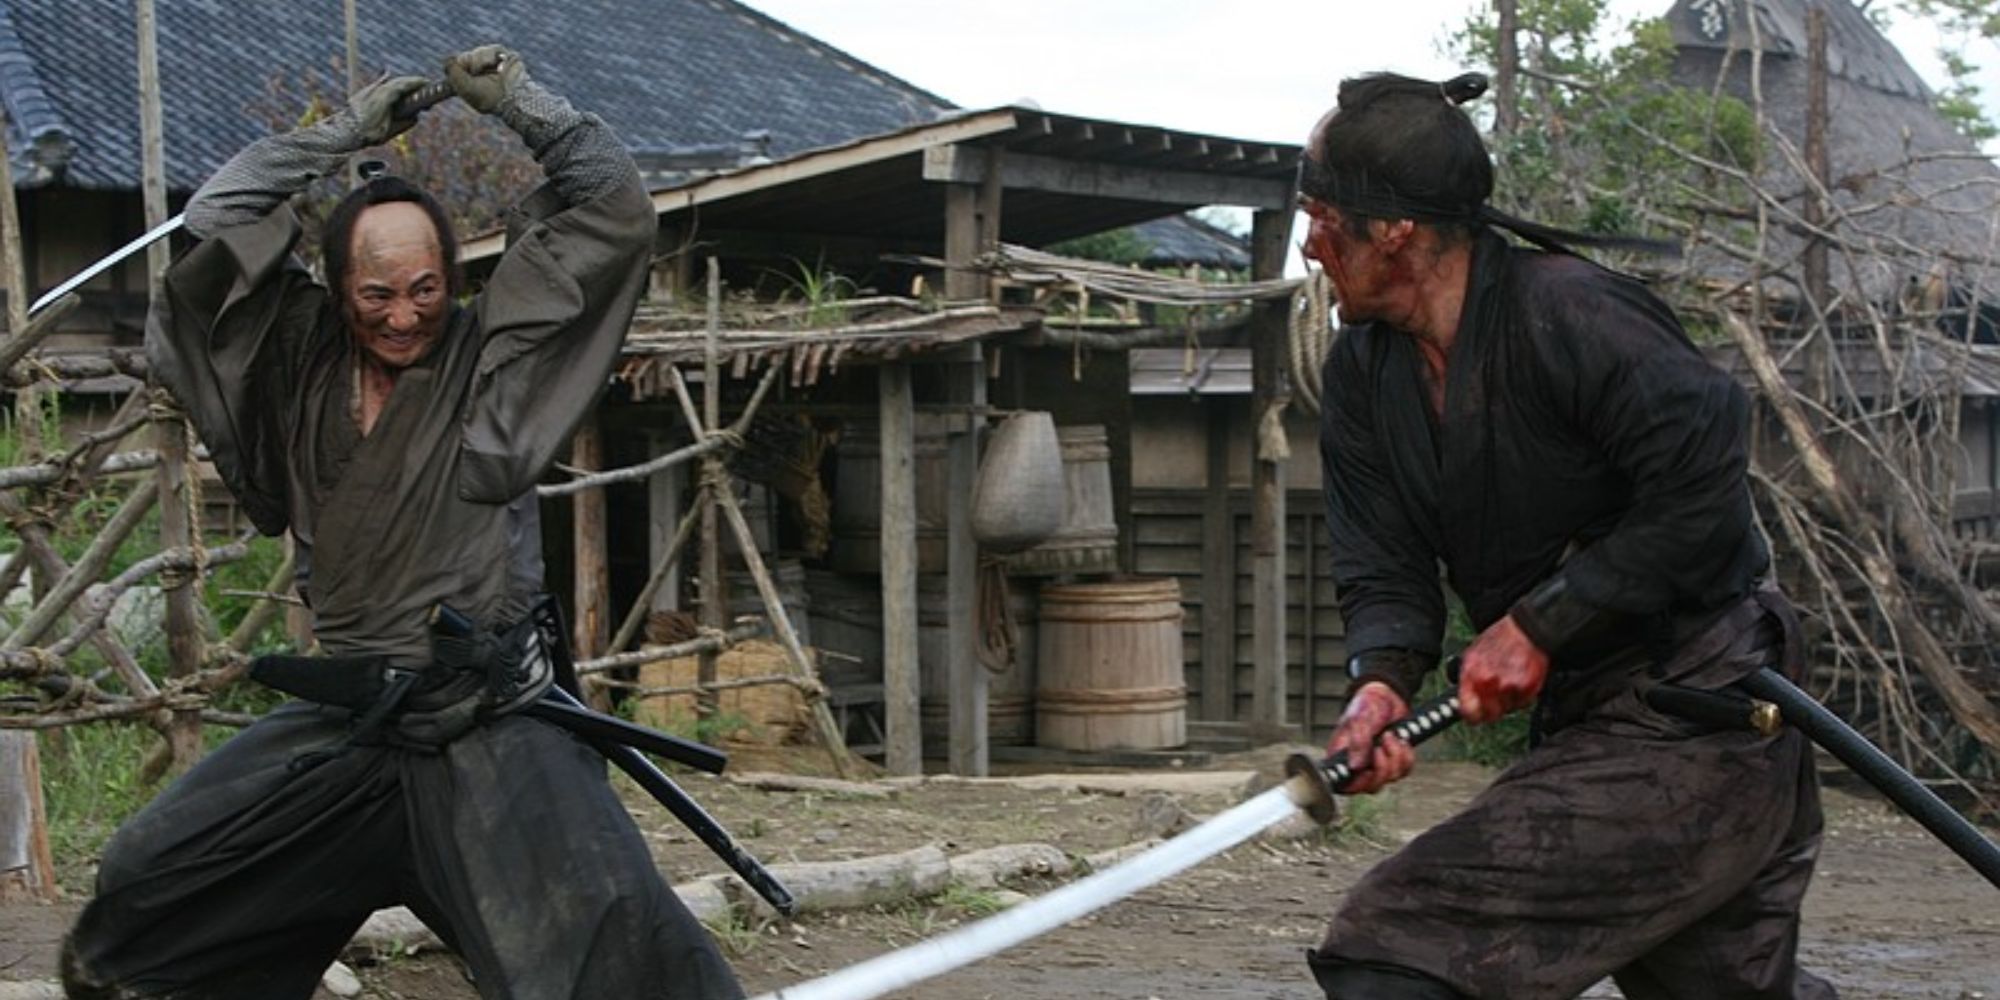 Two samurais are fighting against each other in a rural area of Japan